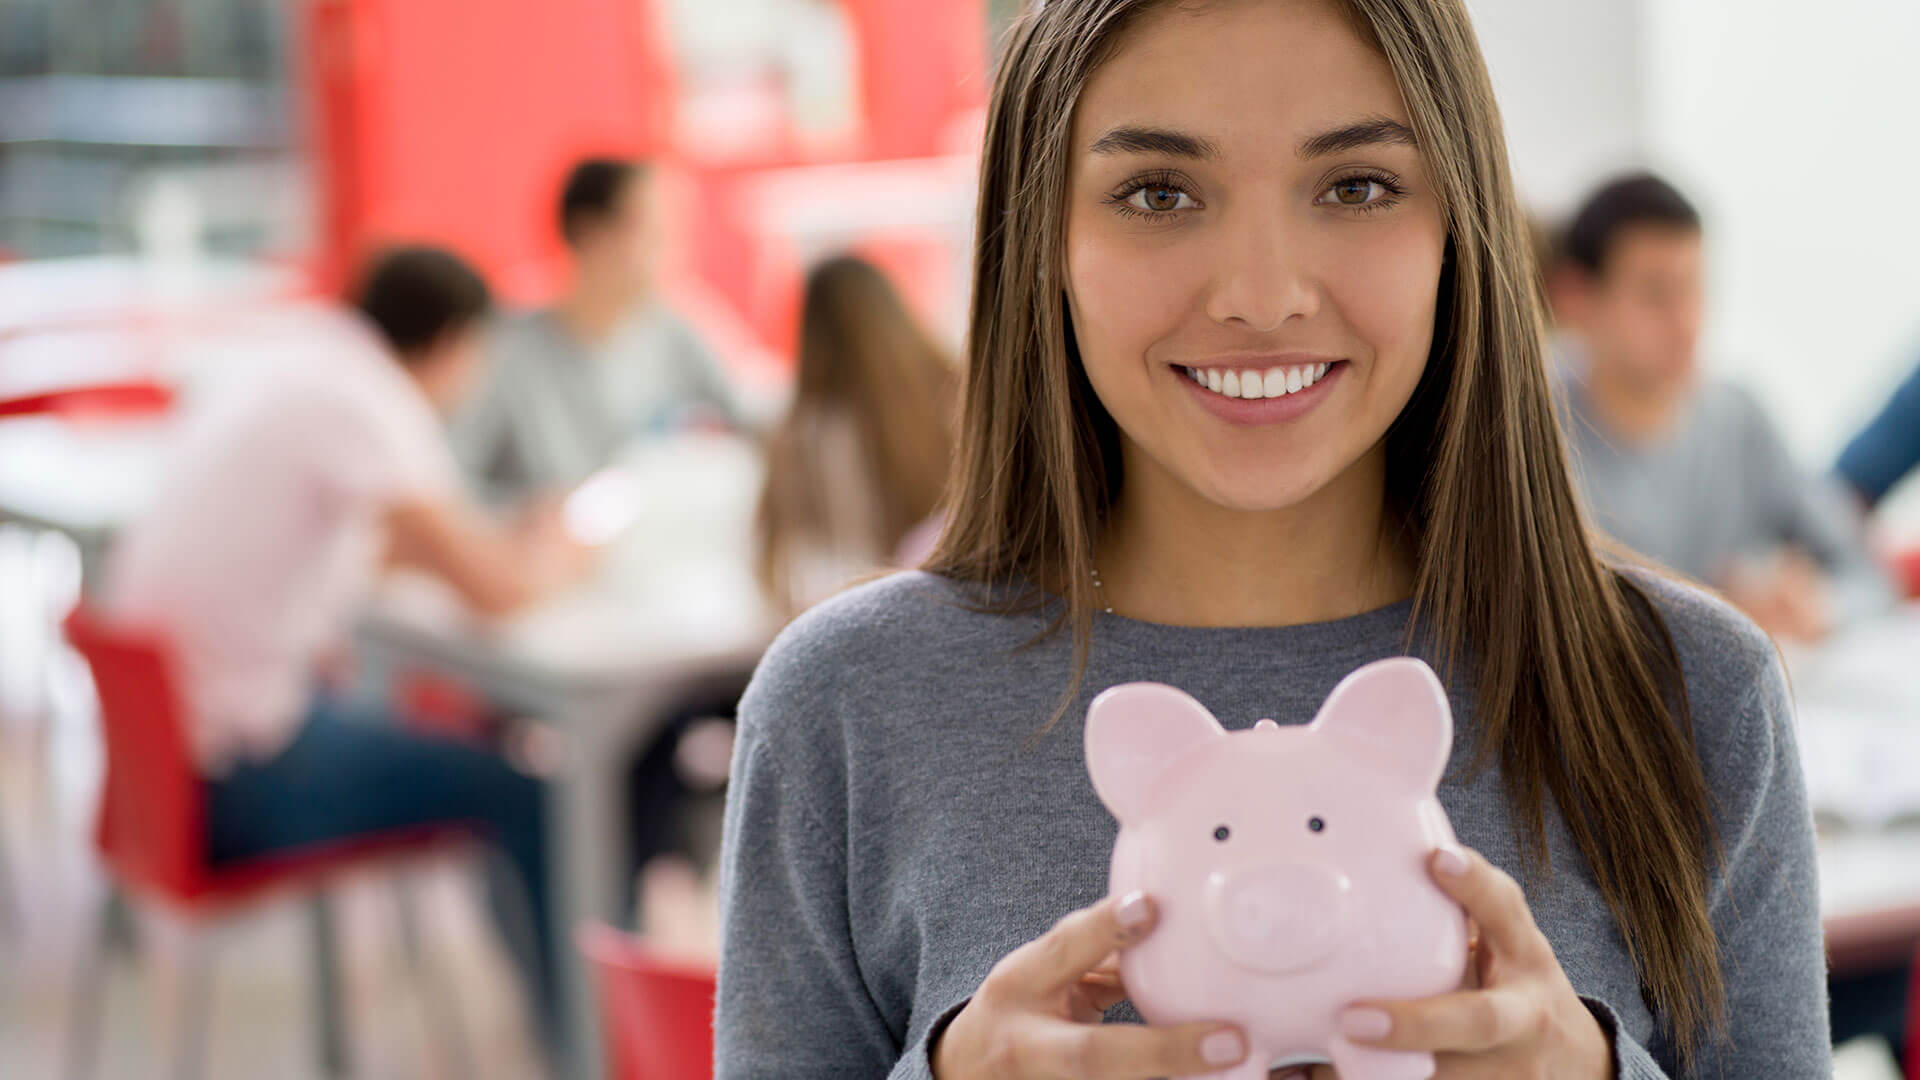 A smiling young woman in a grey sweater holds a pink piggy bank confidently in an office setting, suggesting financial planning or savings.